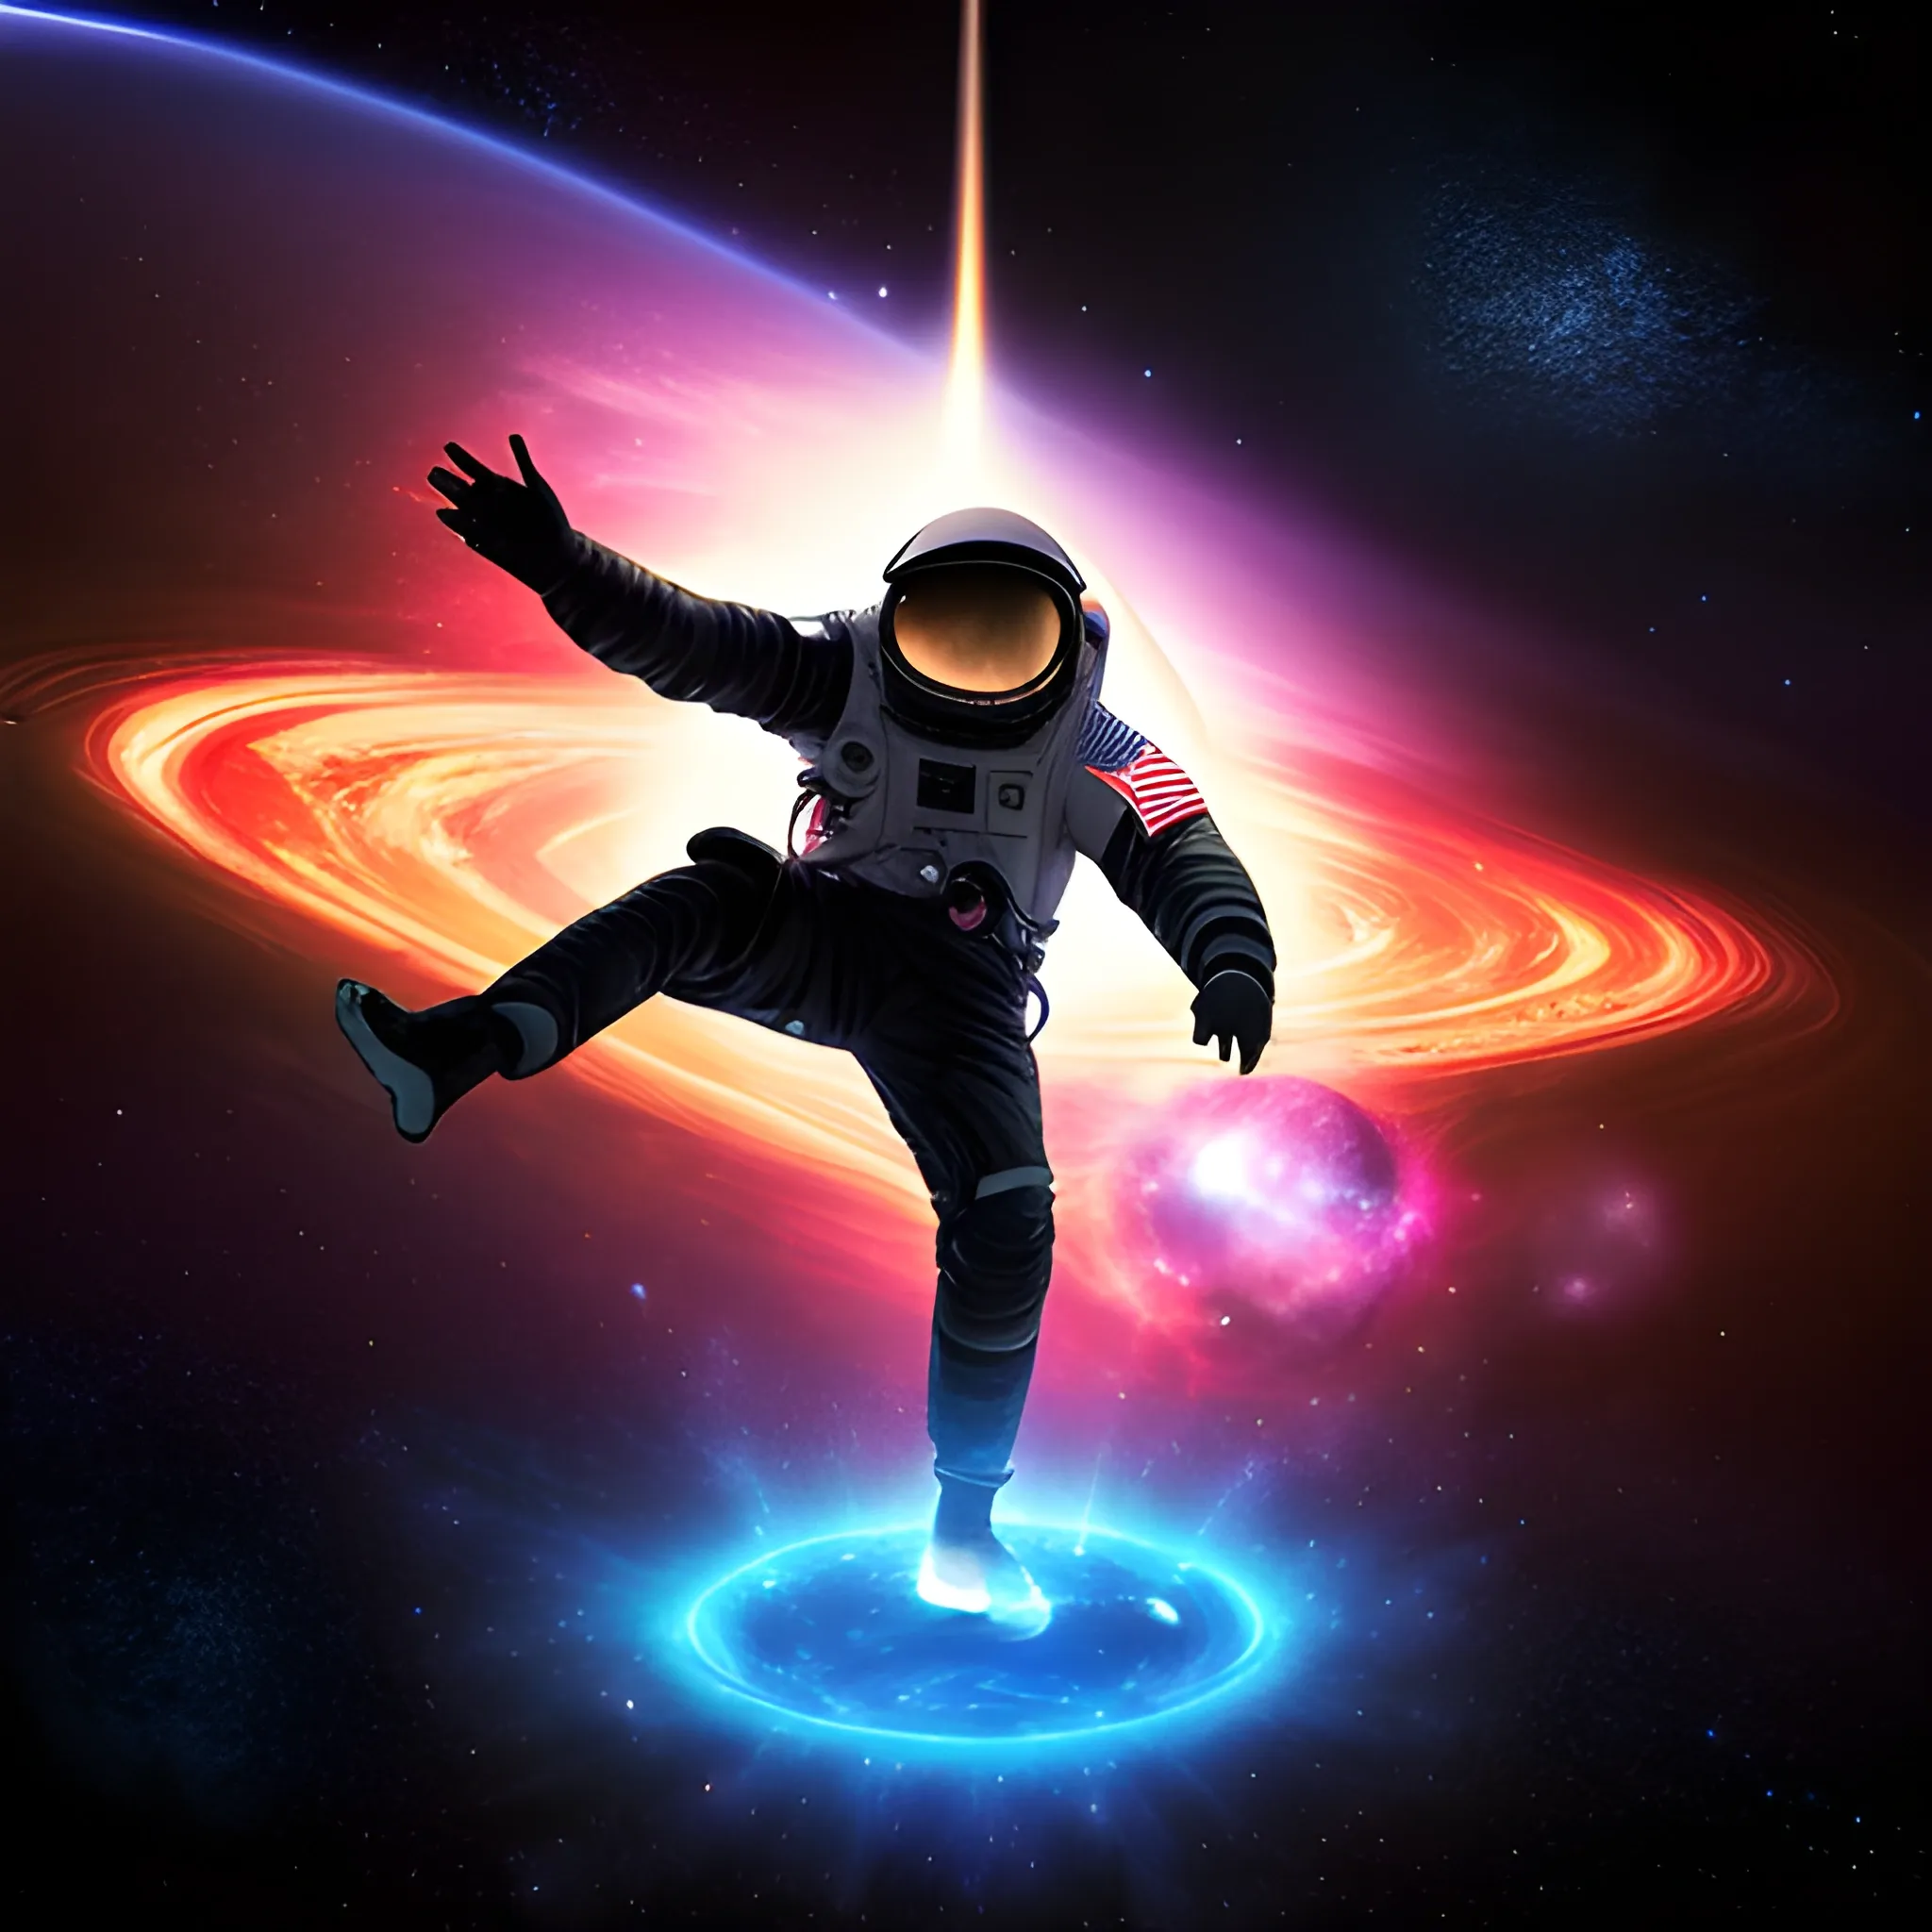 a dark astronaut playing with a soccer ball in foot in a space floating, planets, and beautiful galaxy view, tripping, near a black hole


